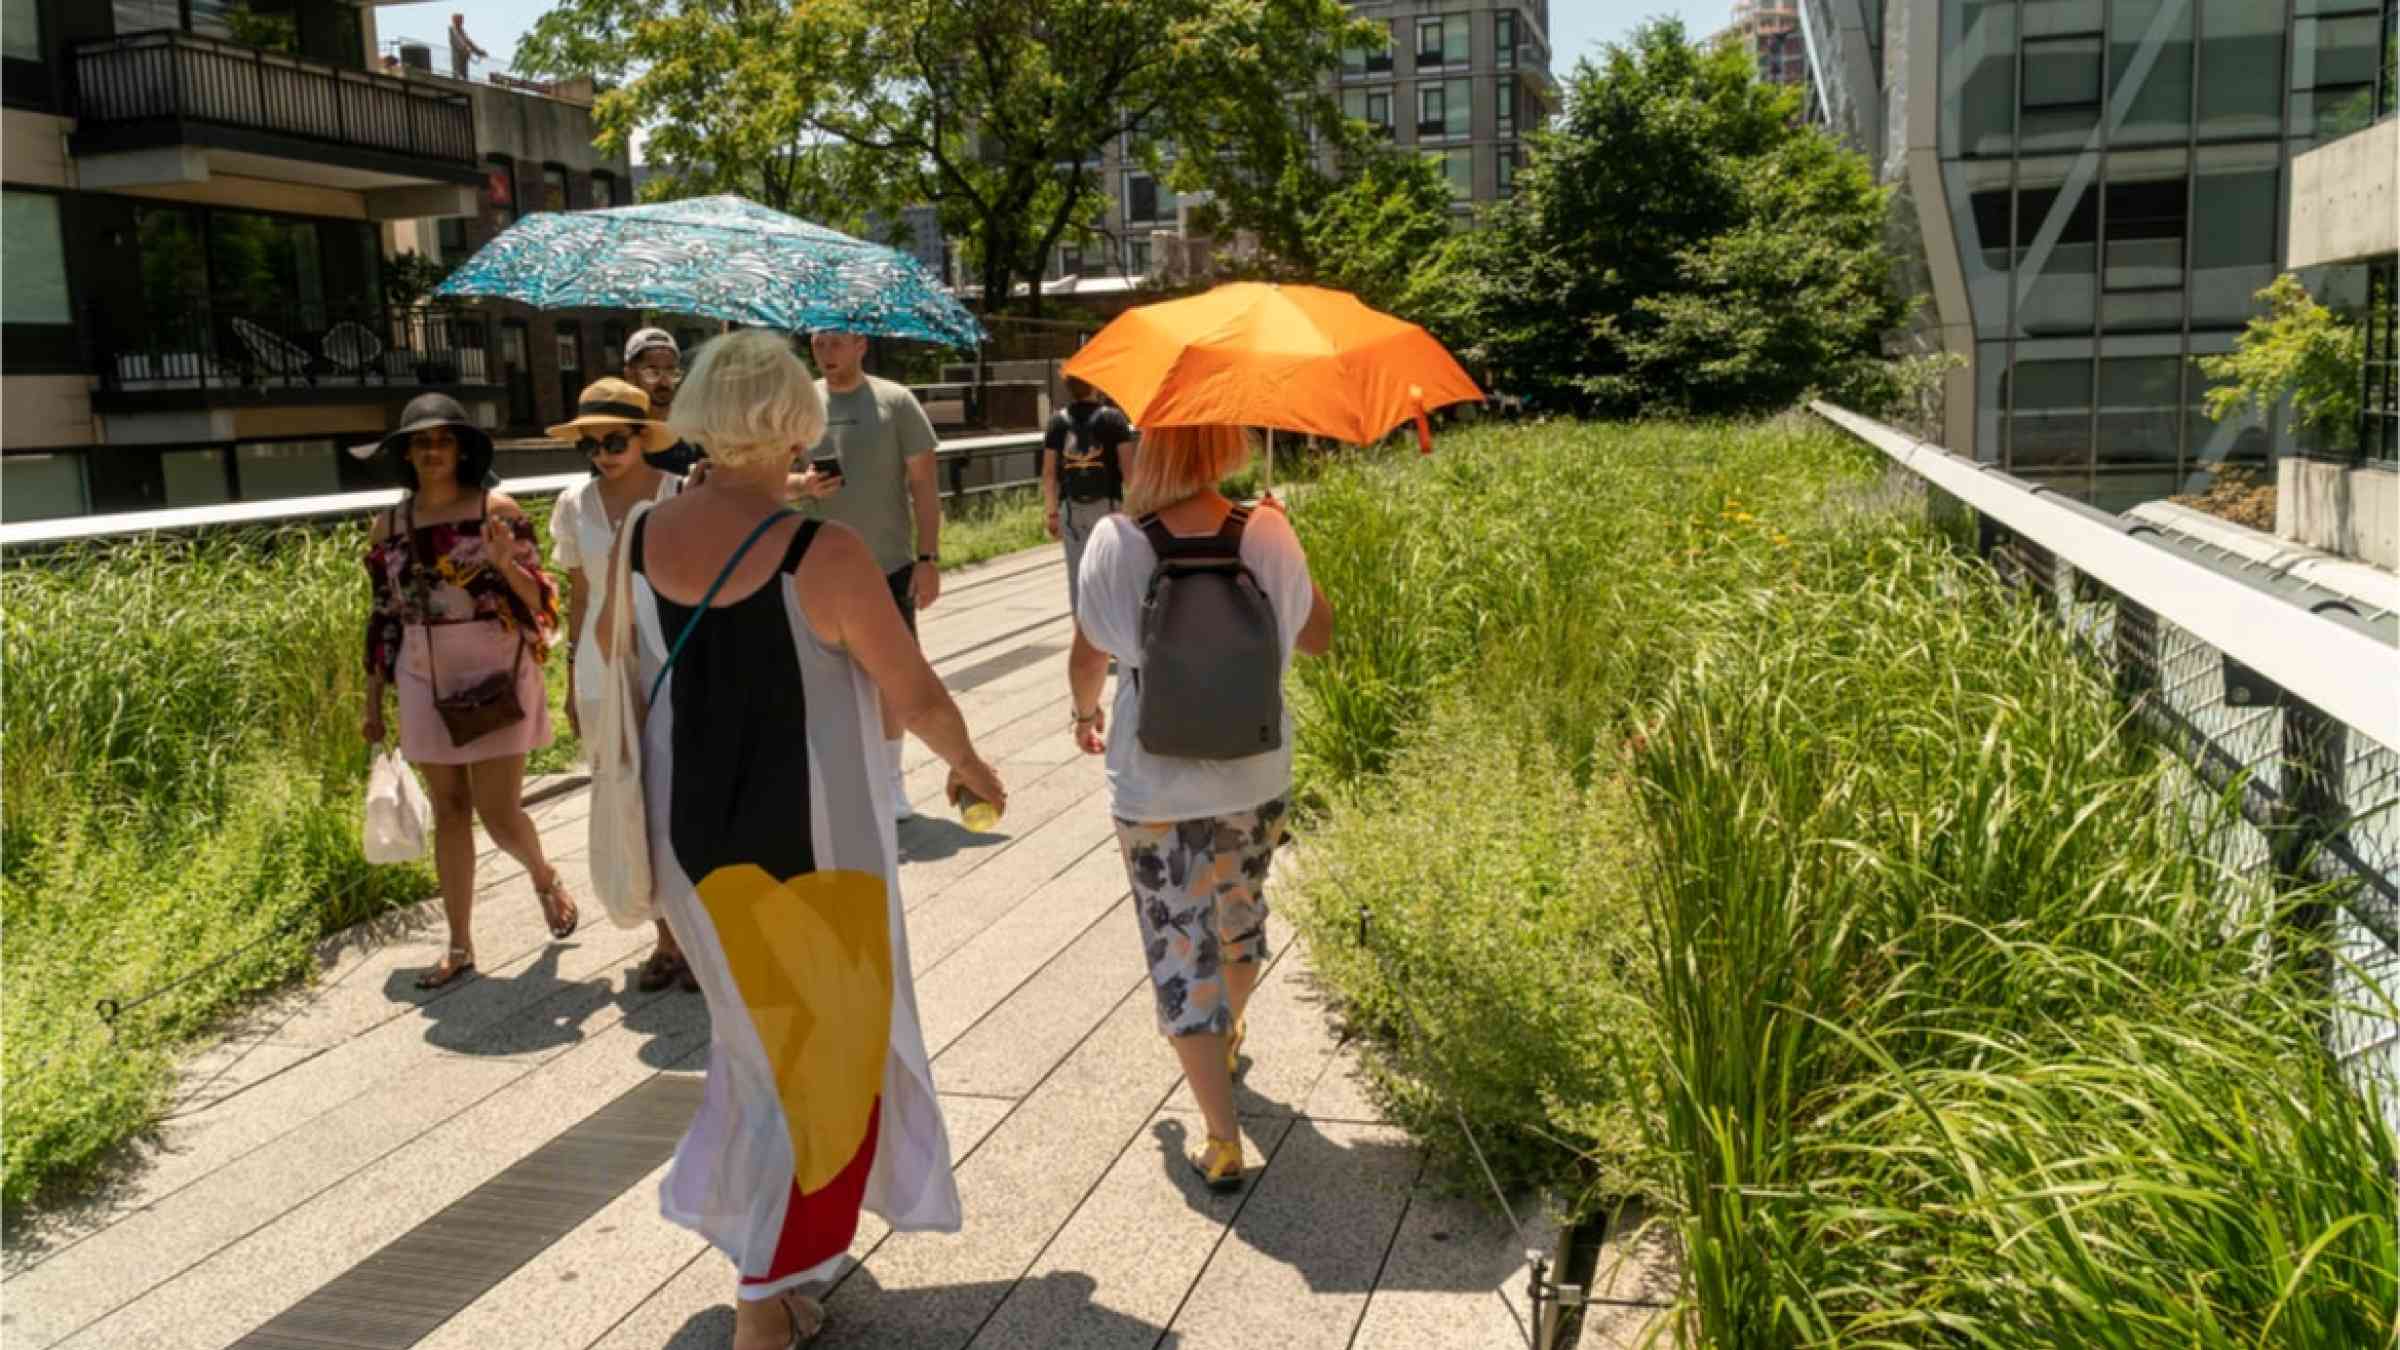 People carrying umbrellas to protect themselves from the sun and heat in the USA.